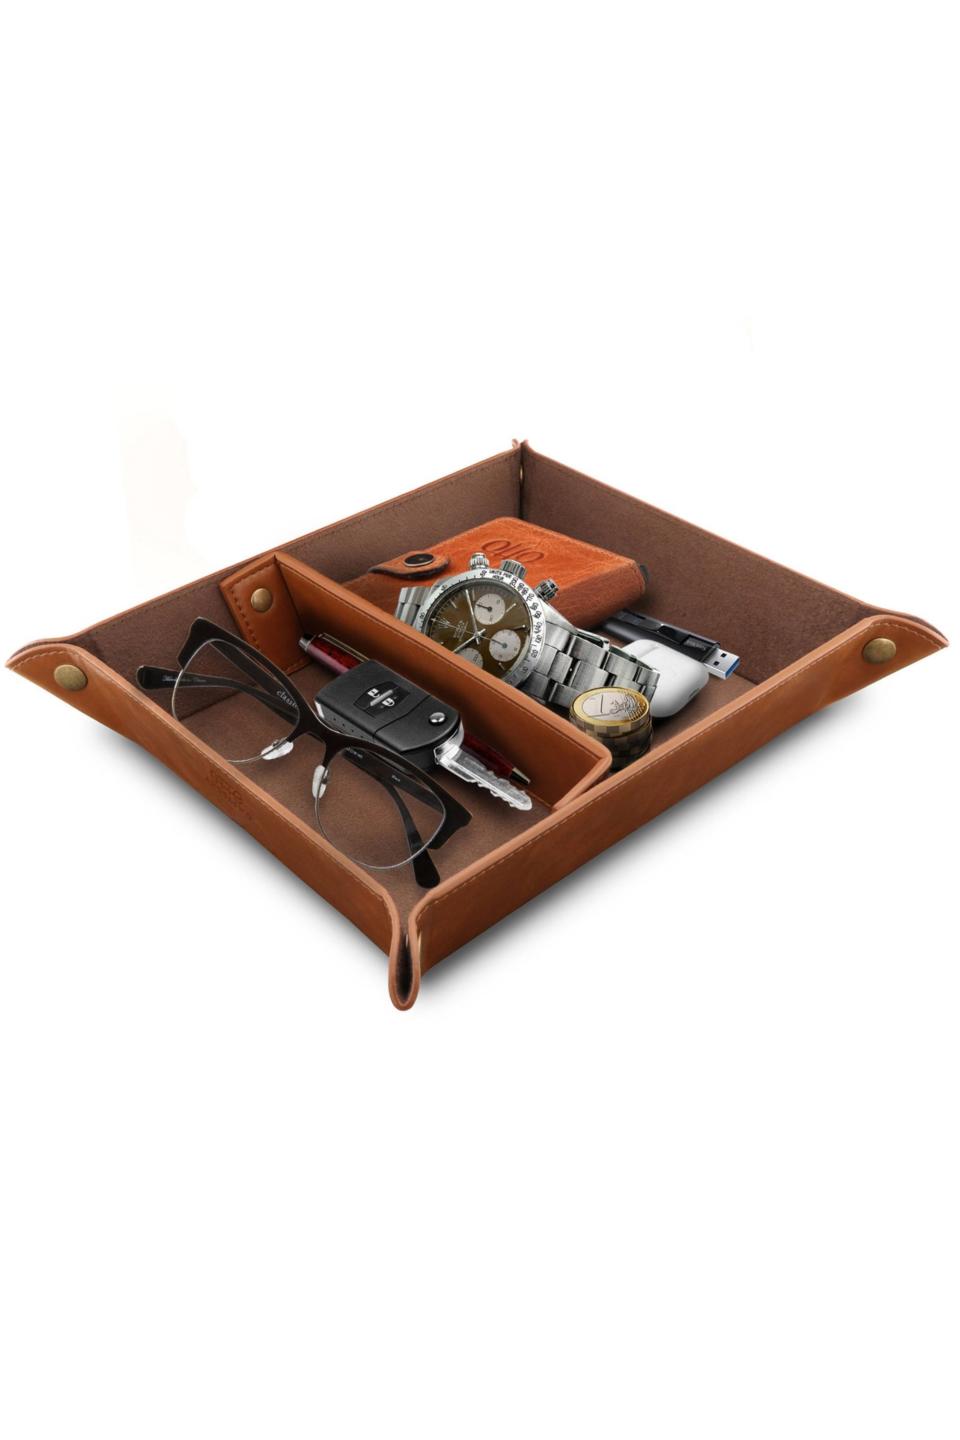 28) Valet Snap Personalized Leather Catchall